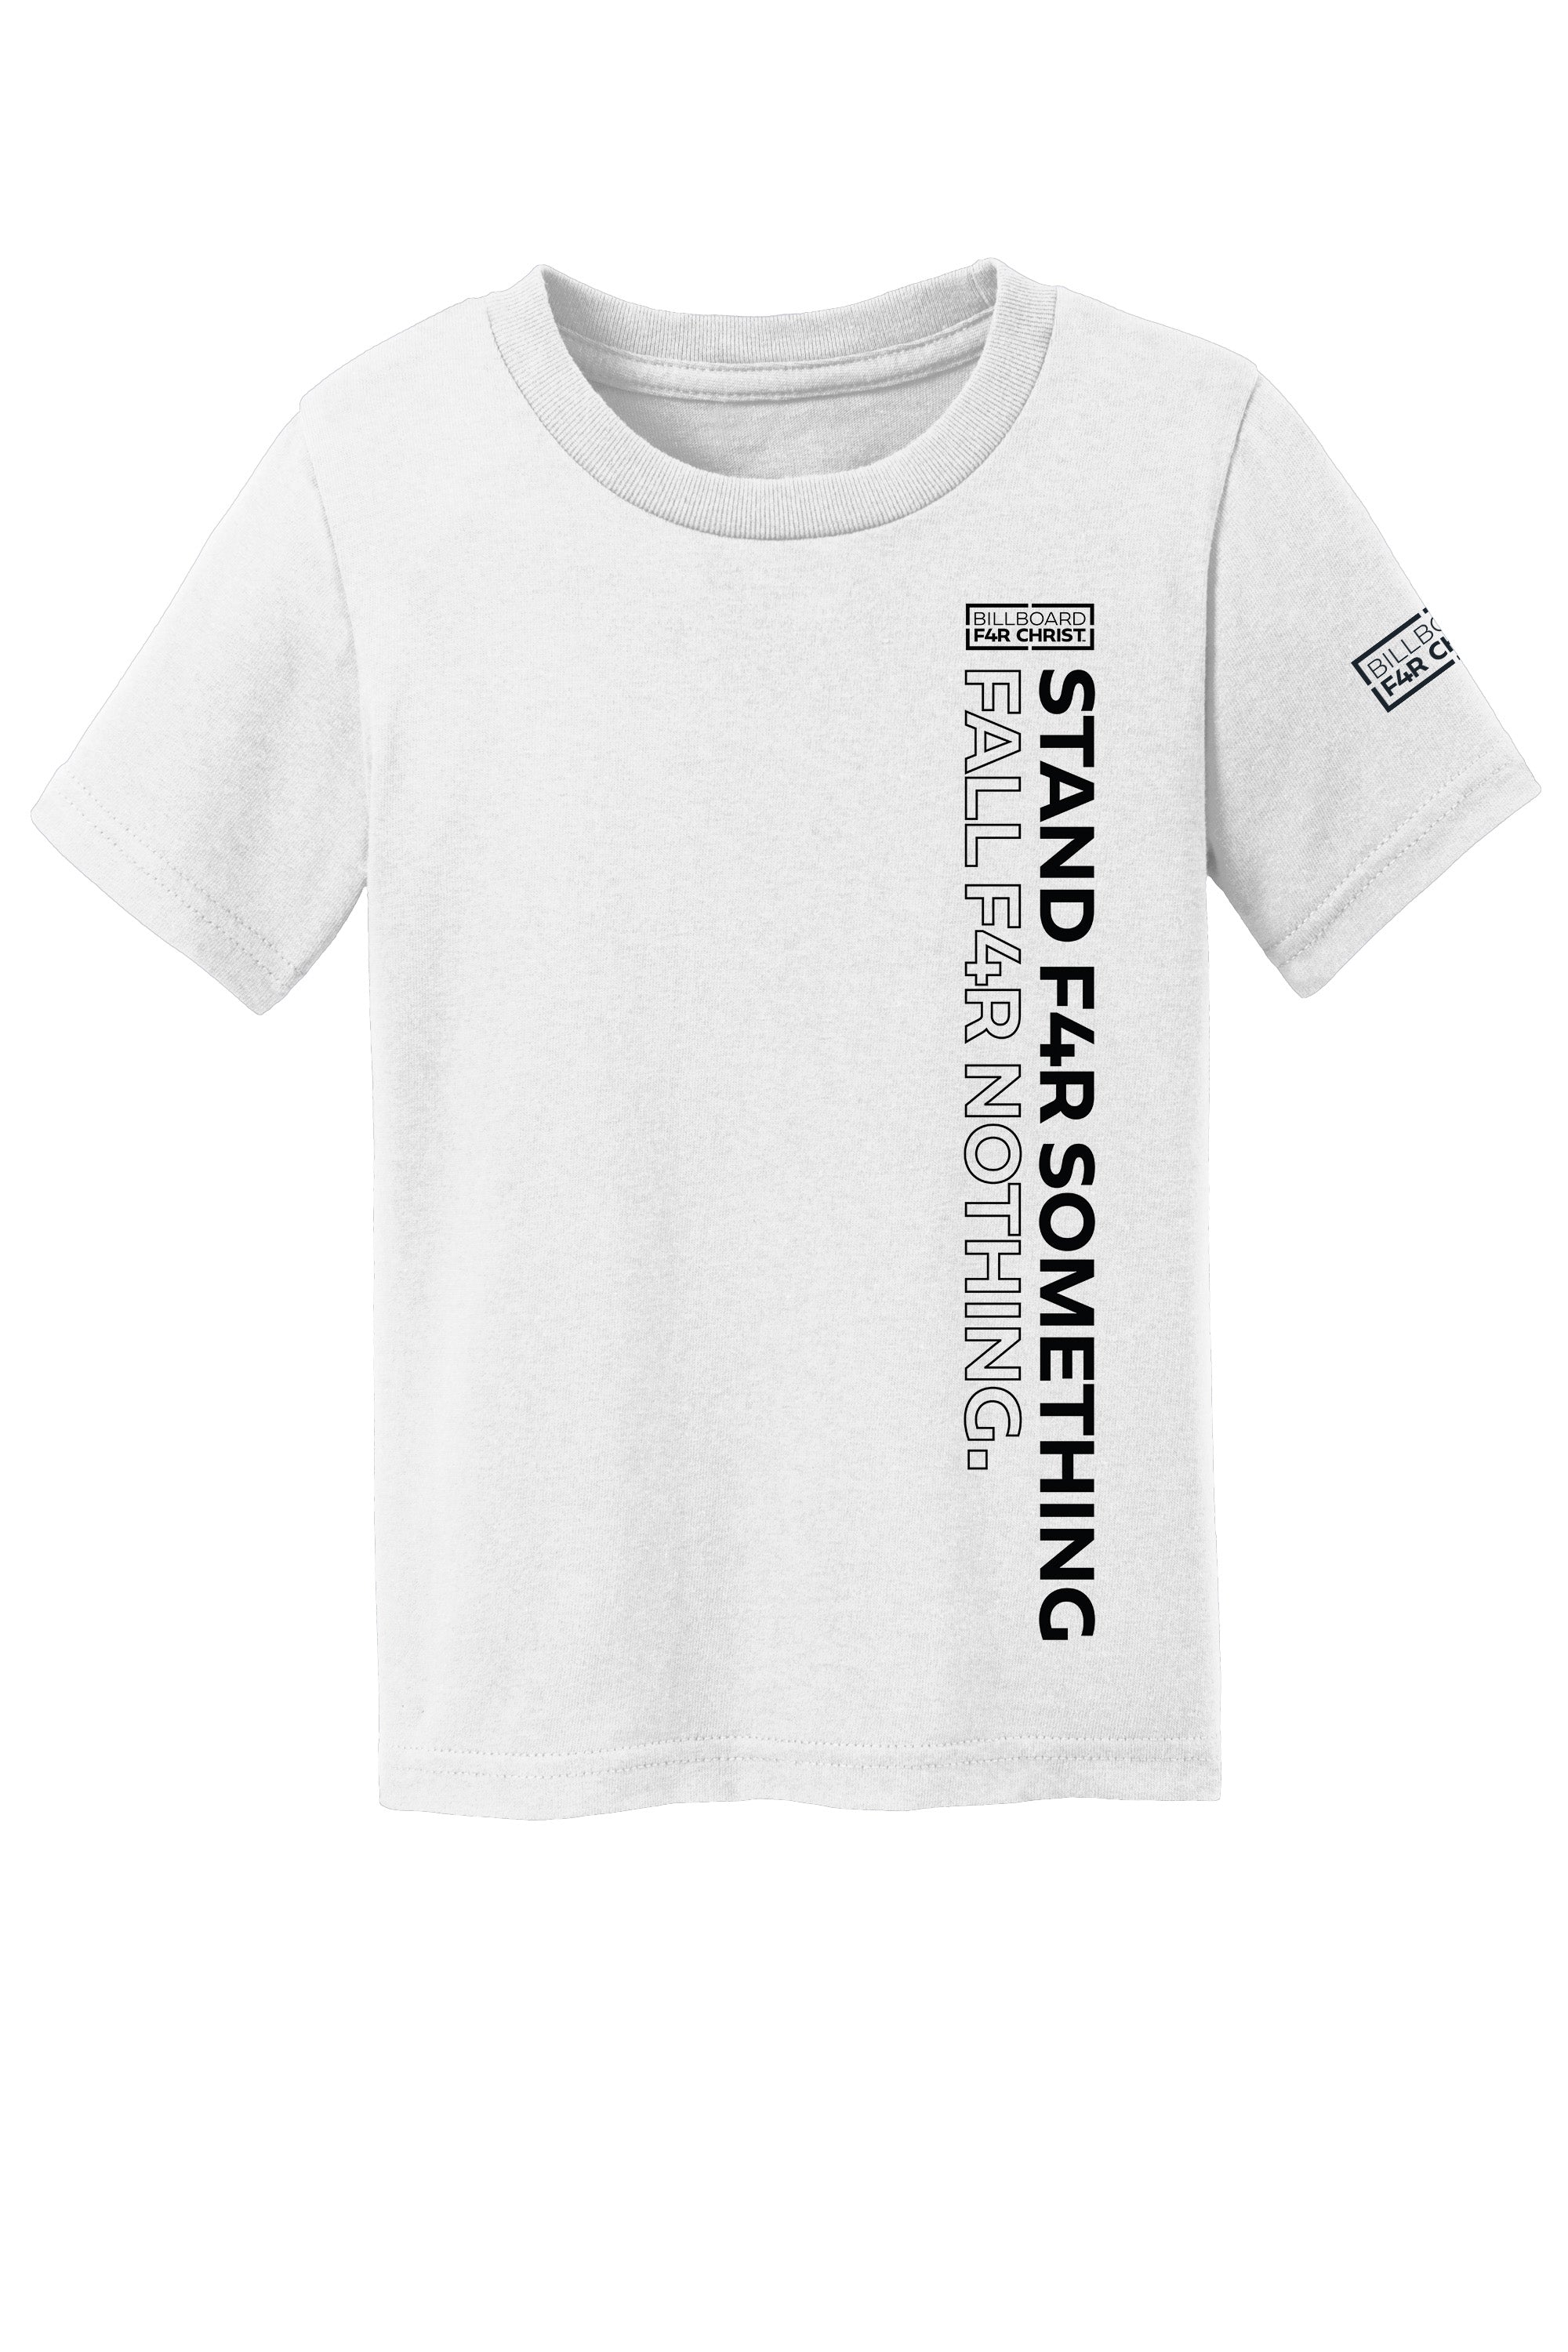 Stand F4R Something Toddler T-Shirt